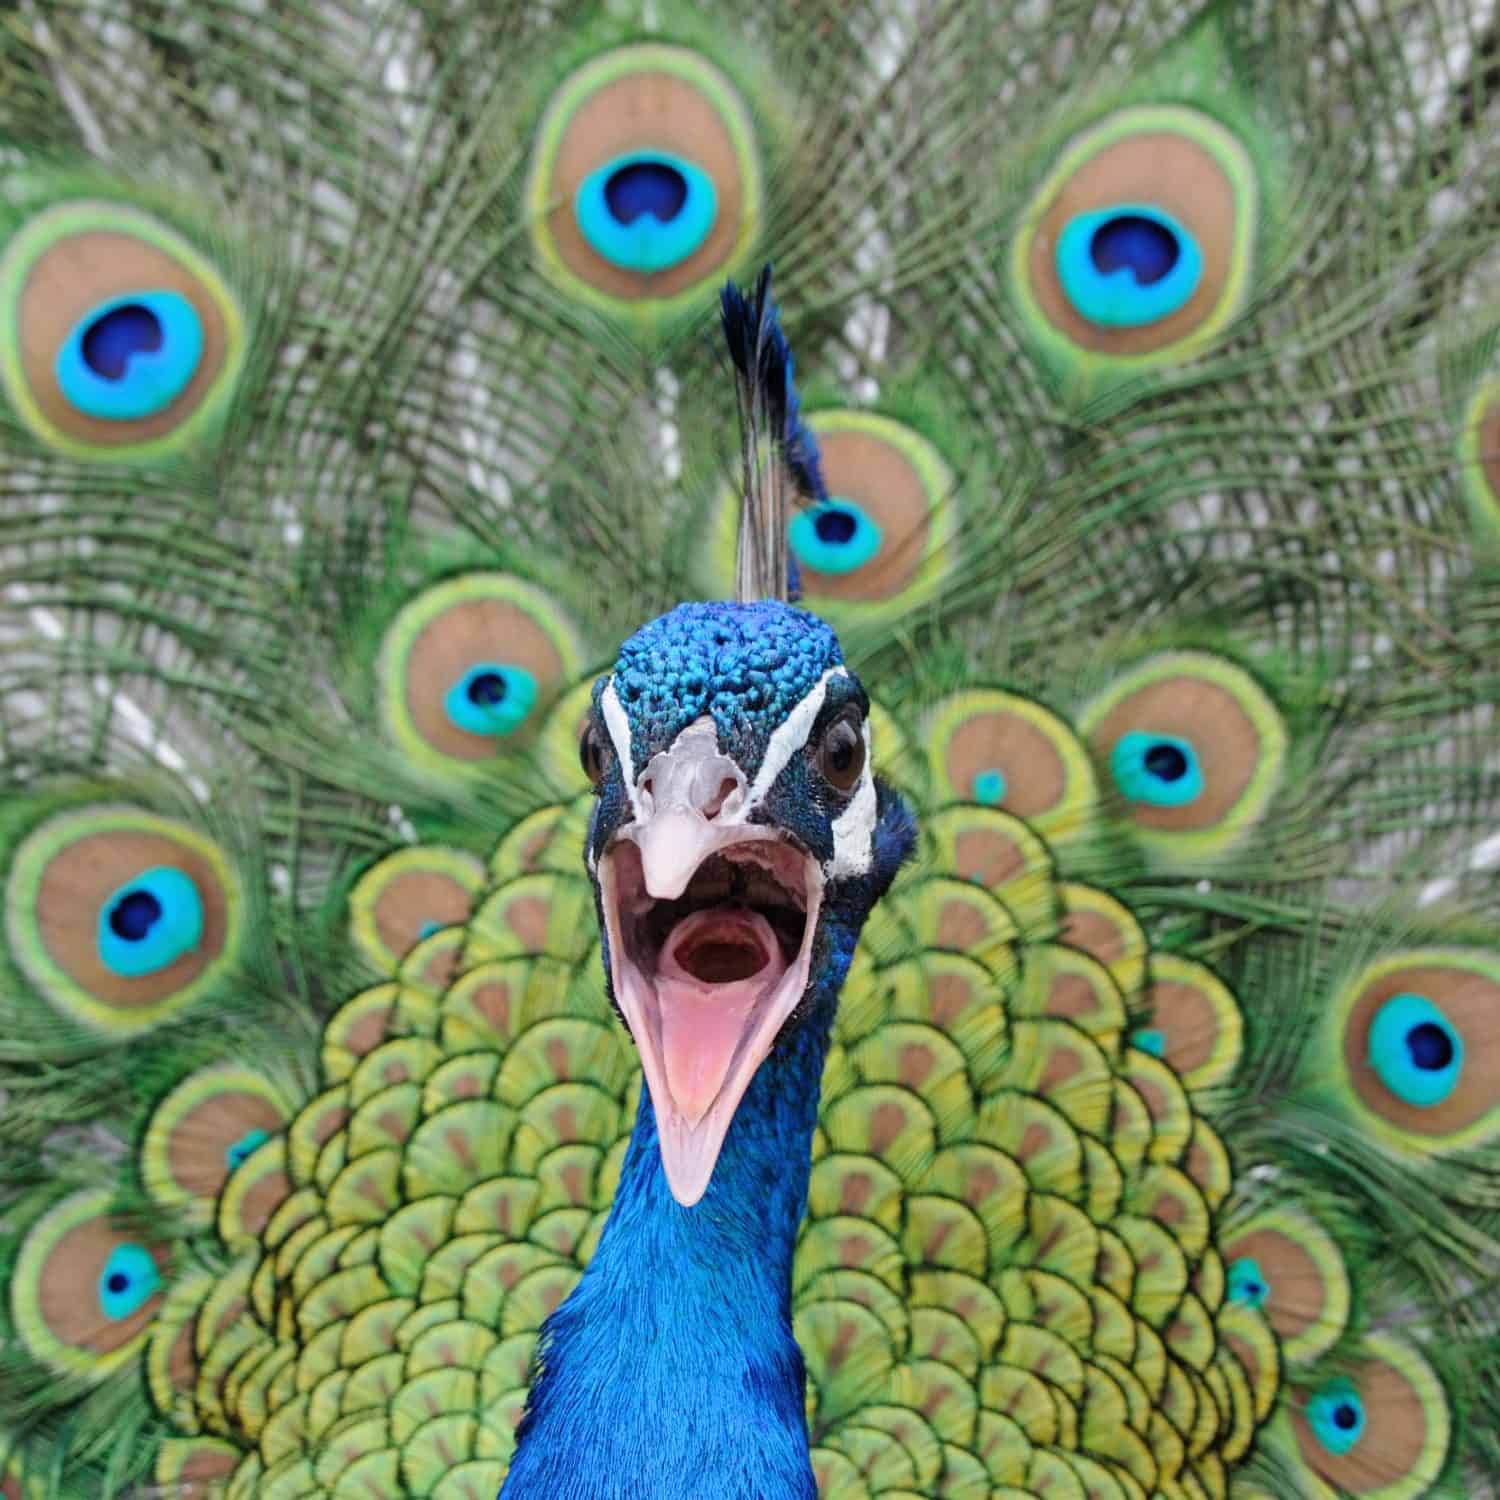 Peacock opens mouth